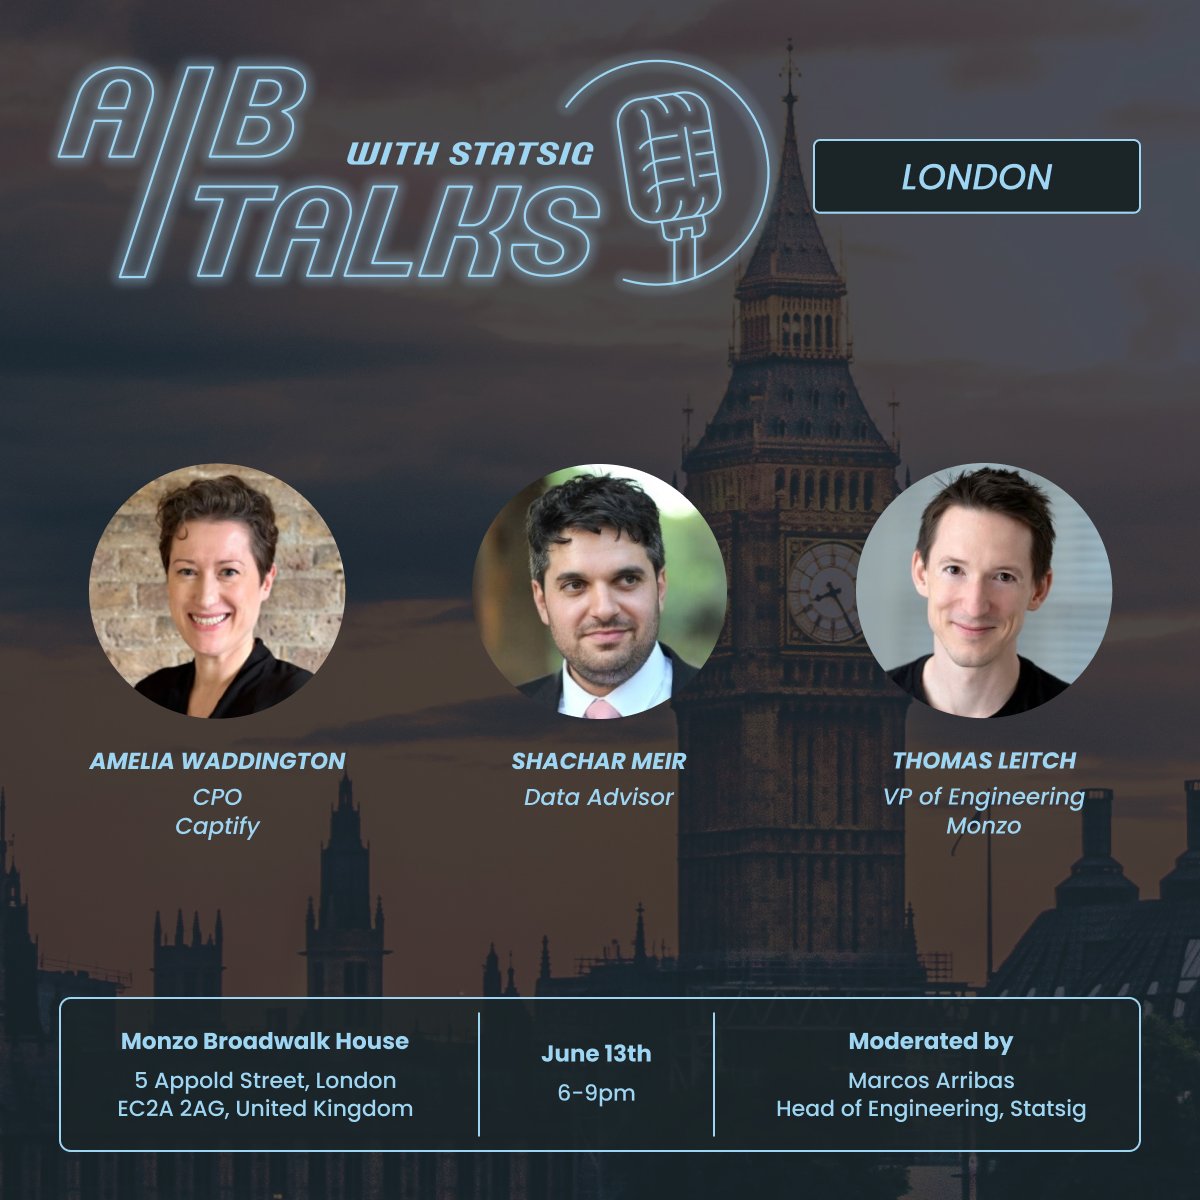 Join us for A/B Talks: London on June 13th 🇬🇧

Featuring the CPO of @Captify, the VP of Engineering of @monzo, and Data pros!  

Save your spot: eventbrite.com/e/ab-talks-lon…

Includes: exclusive pair of Statsig socks 🧦

#abtalks #abtests #statsig #featureflags #abtesting